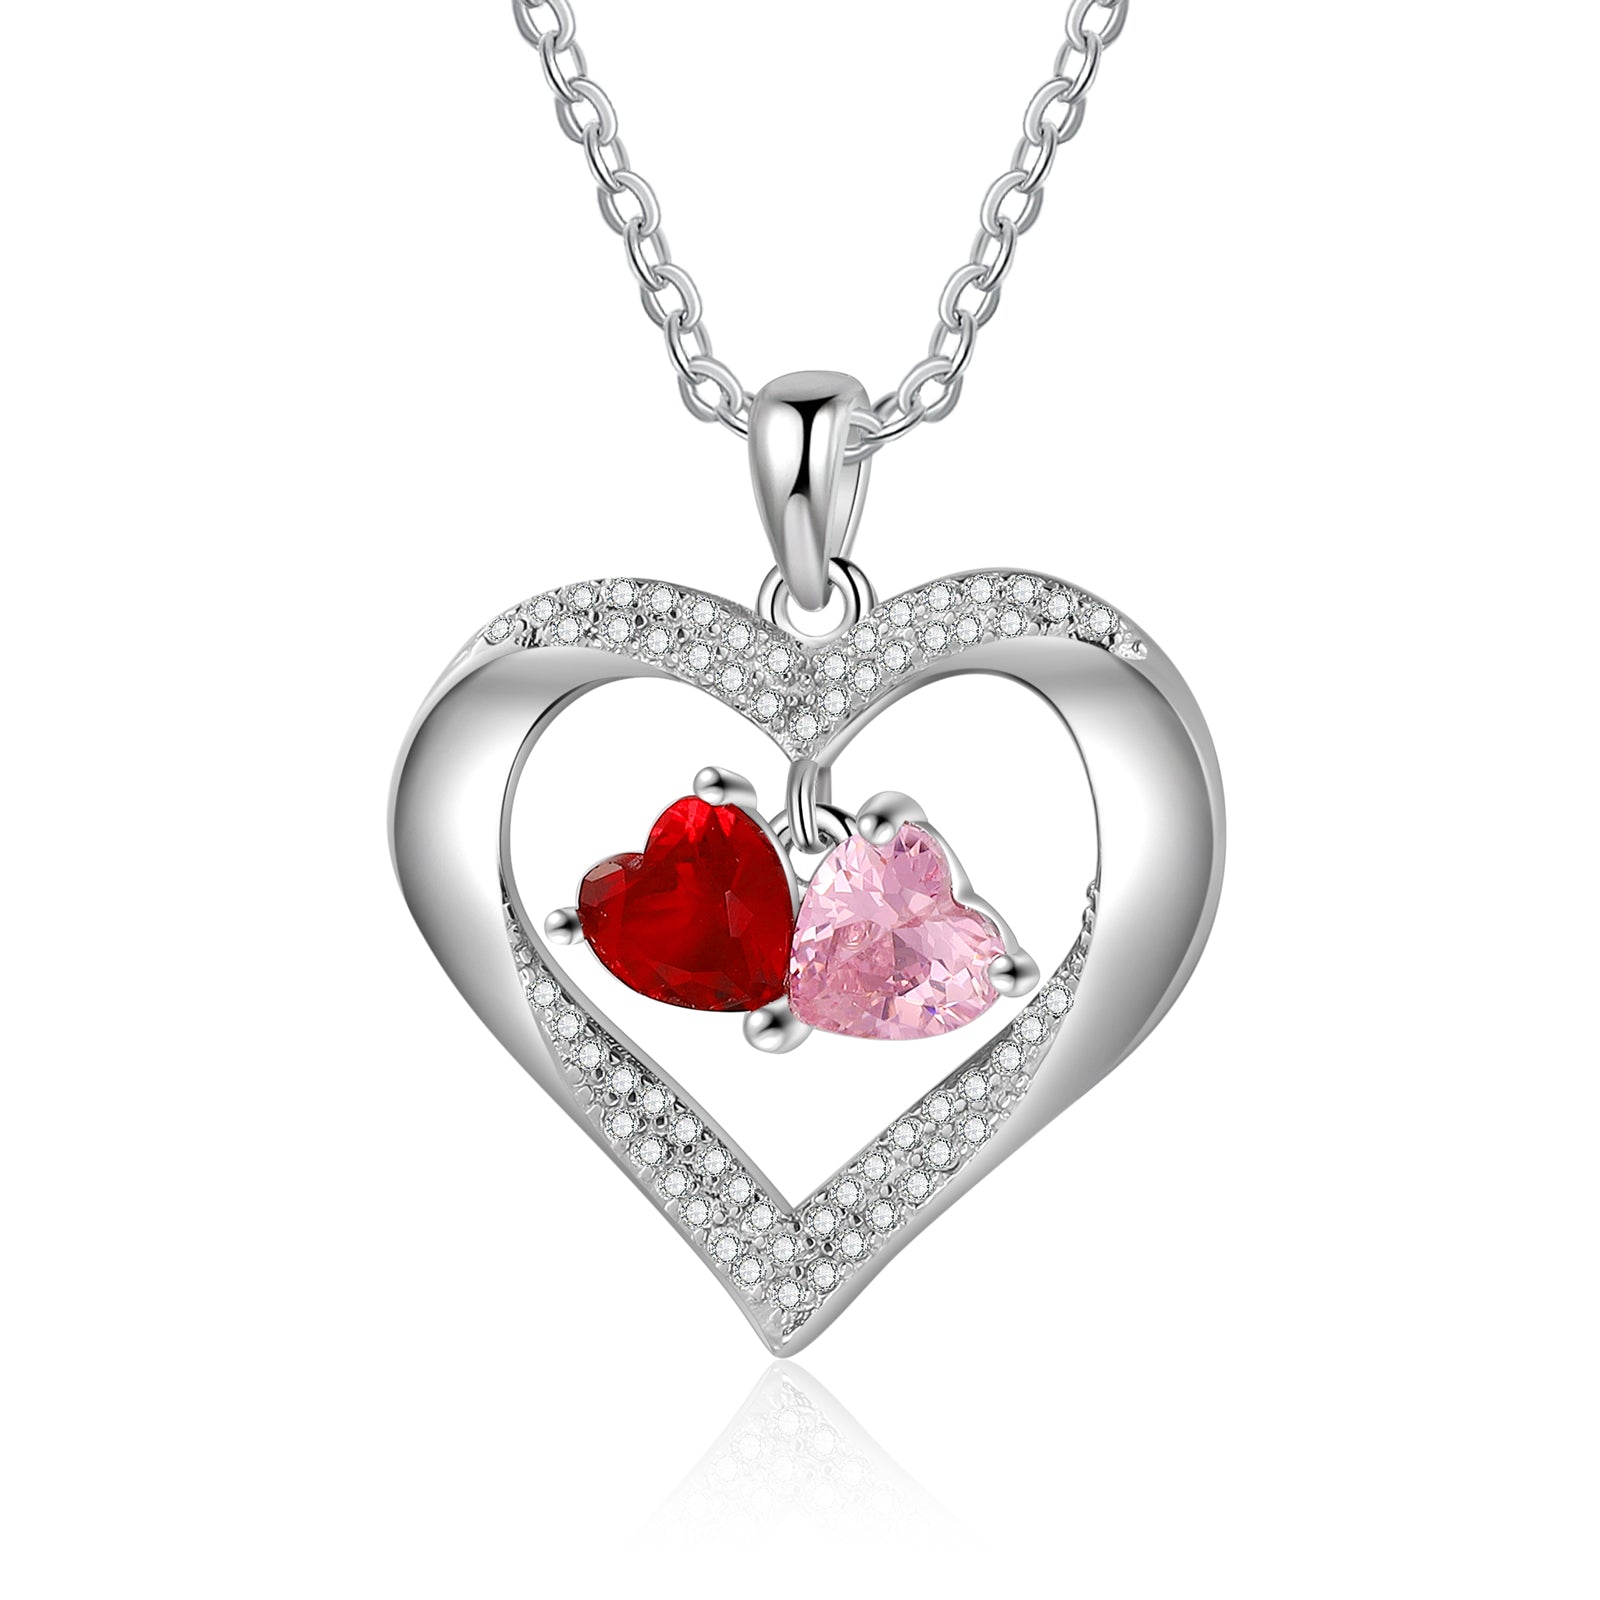  Heart Necklace